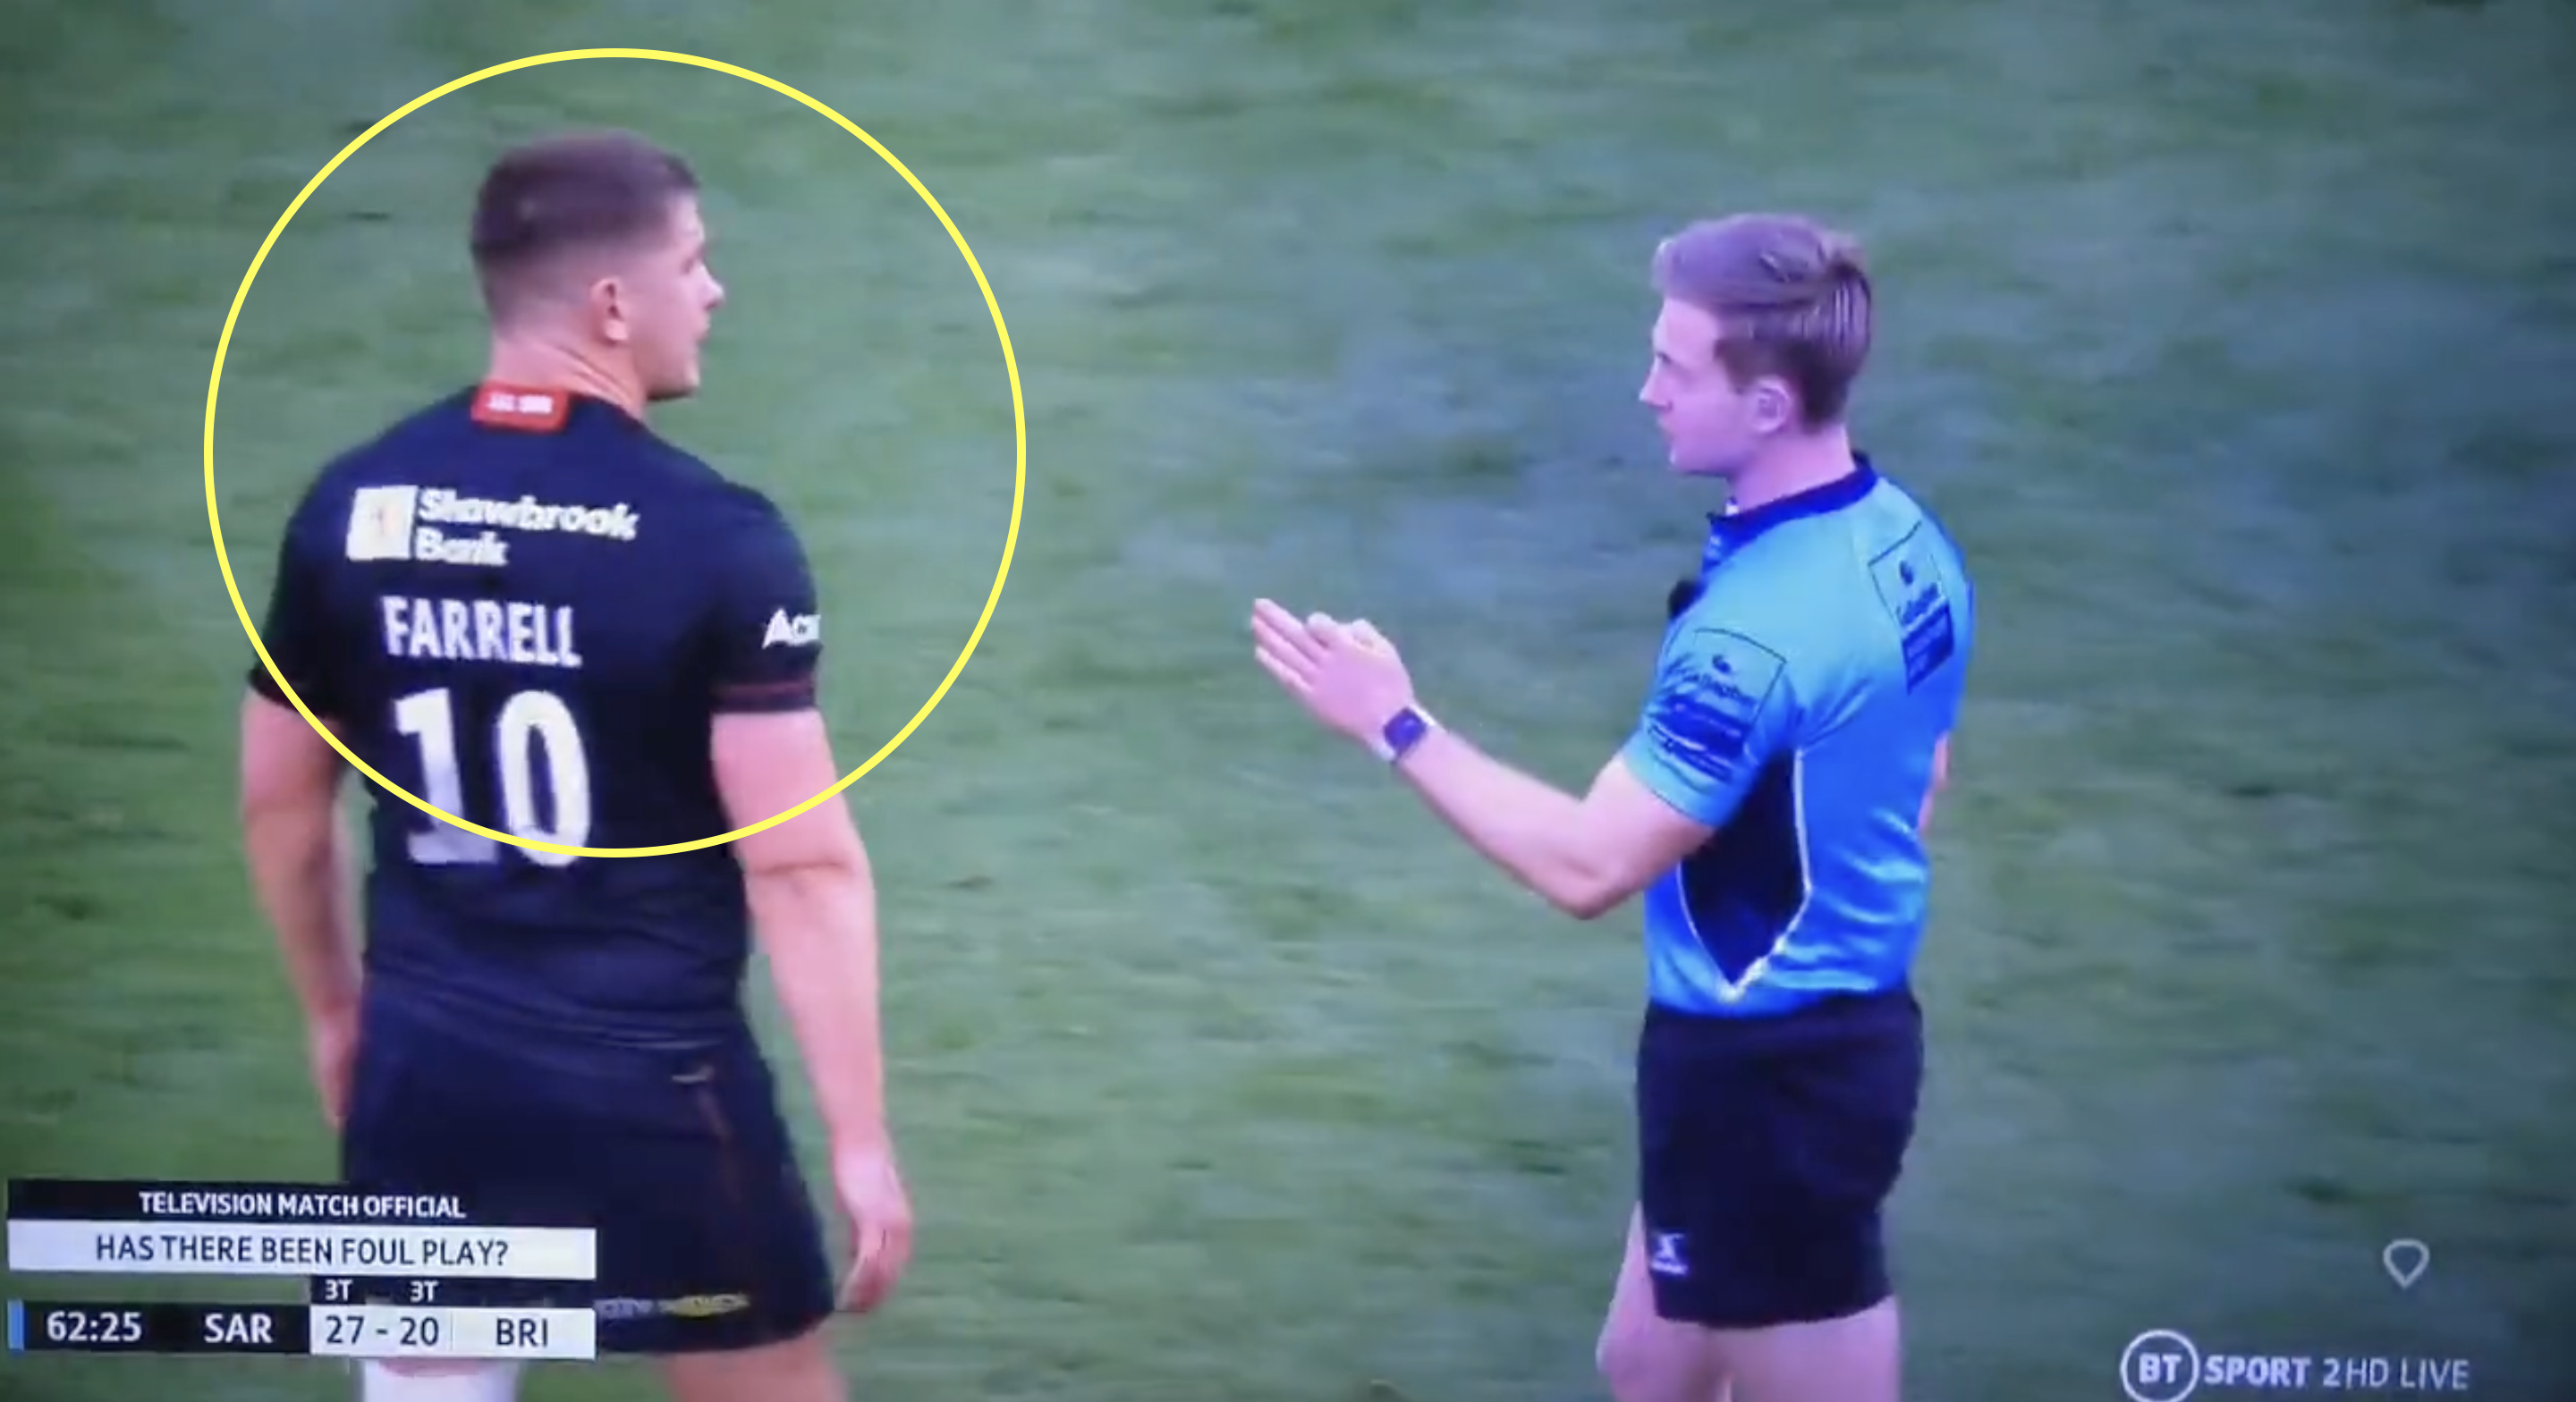 Owen Farrell was just inches away from massive ban with classic Farrell tackle